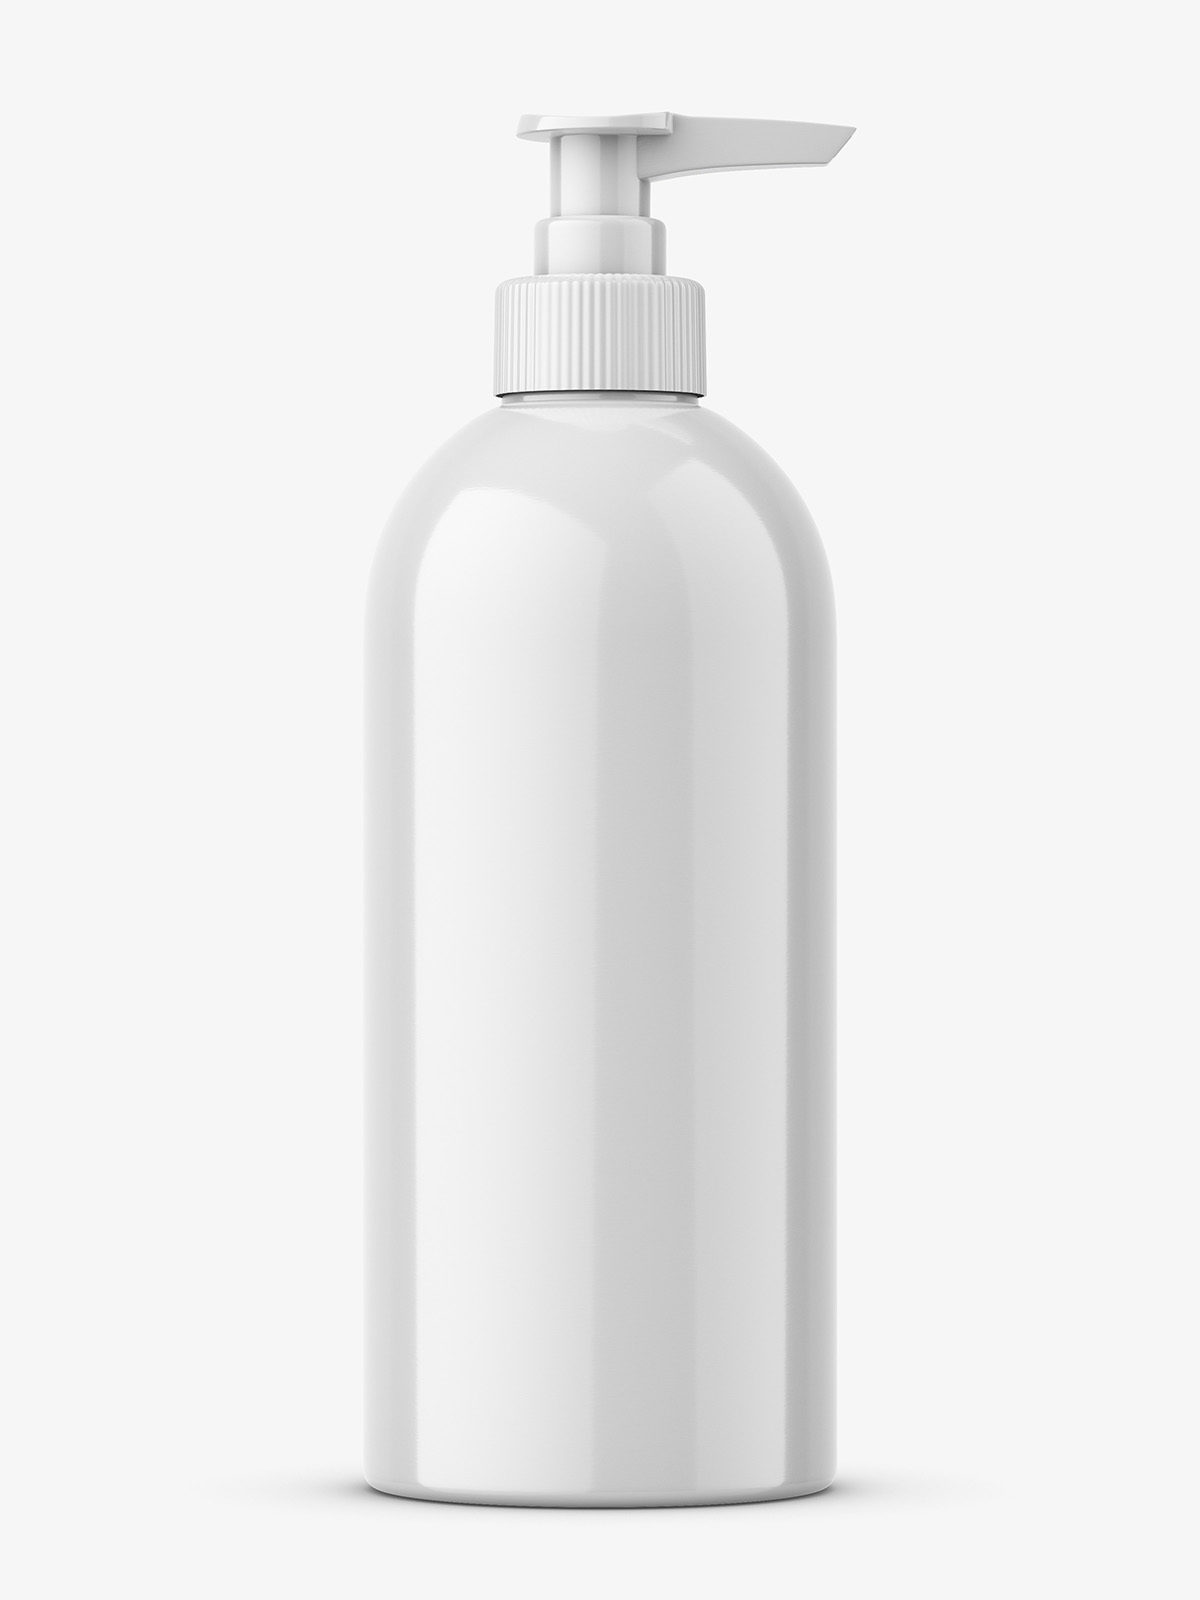 Download Plastic Glossy Bottle With Pump Mockup Smarty Mockups Yellowimages Mockups